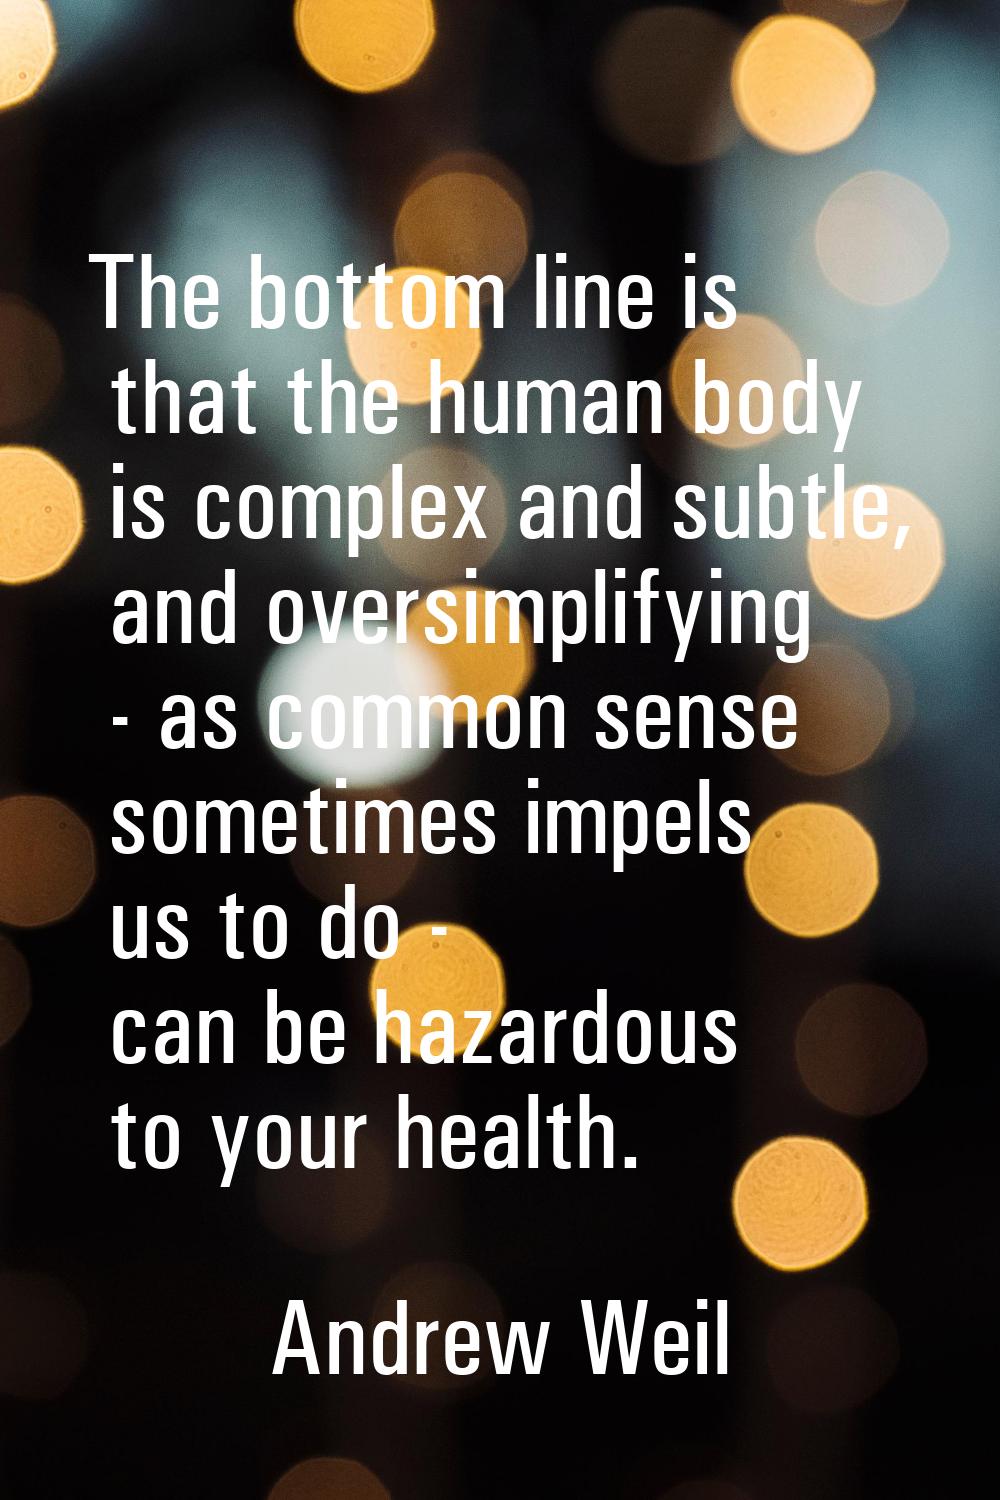 The bottom line is that the human body is complex and subtle, and oversimplifying - as common sense